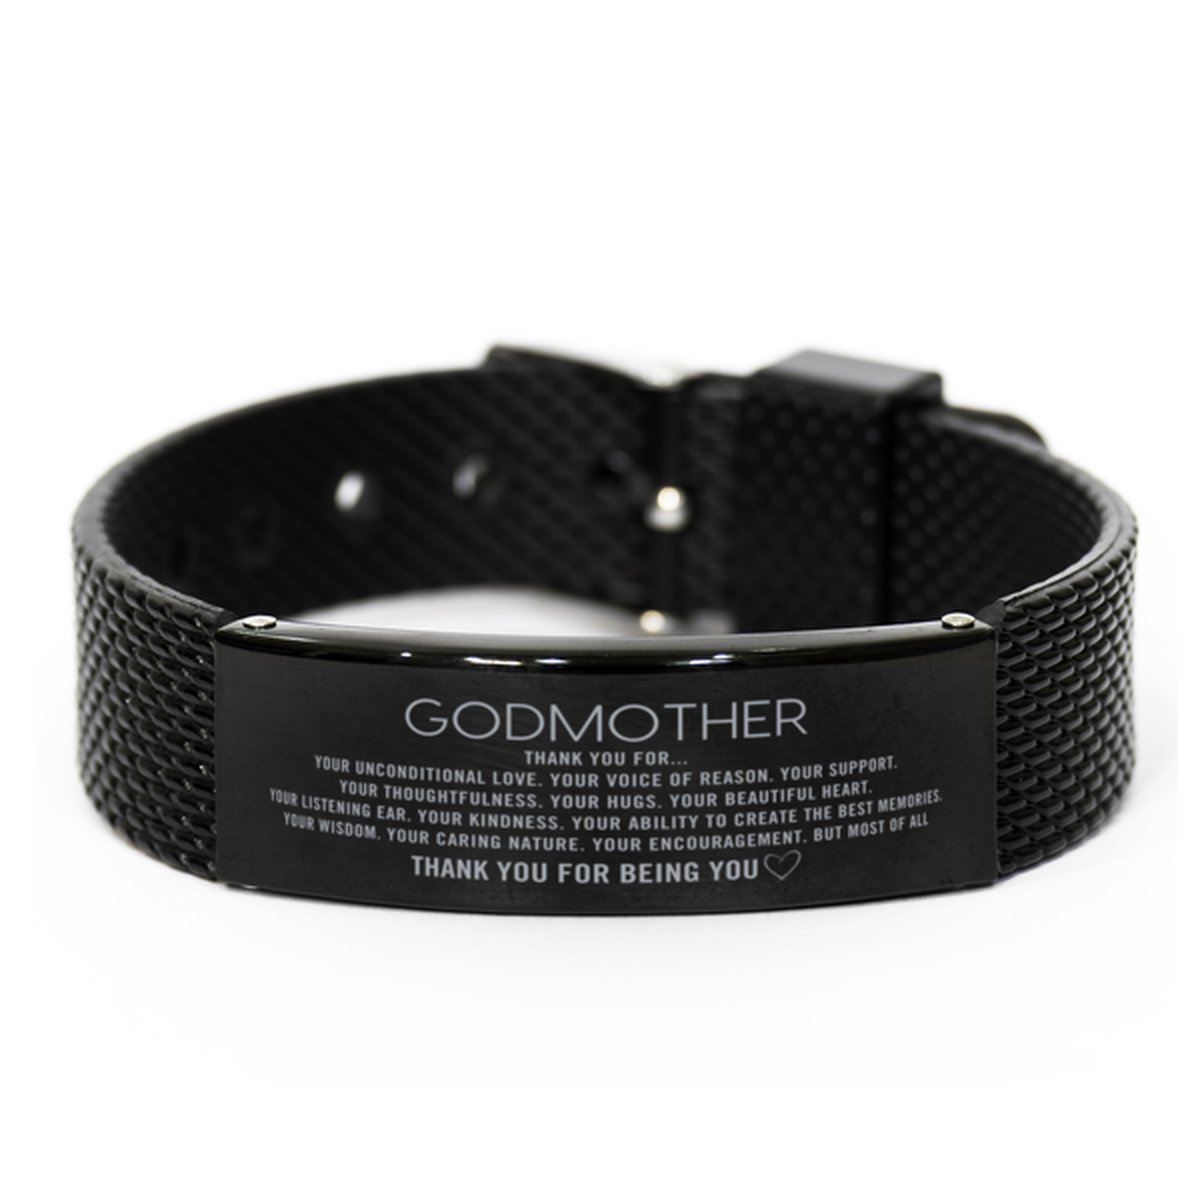 Godmother Black Shark Mesh Bracelet Custom, Engraved Gifts For Godmother Christmas Graduation Birthday Gifts for Men Women Godmother Thank you for Your unconditional love